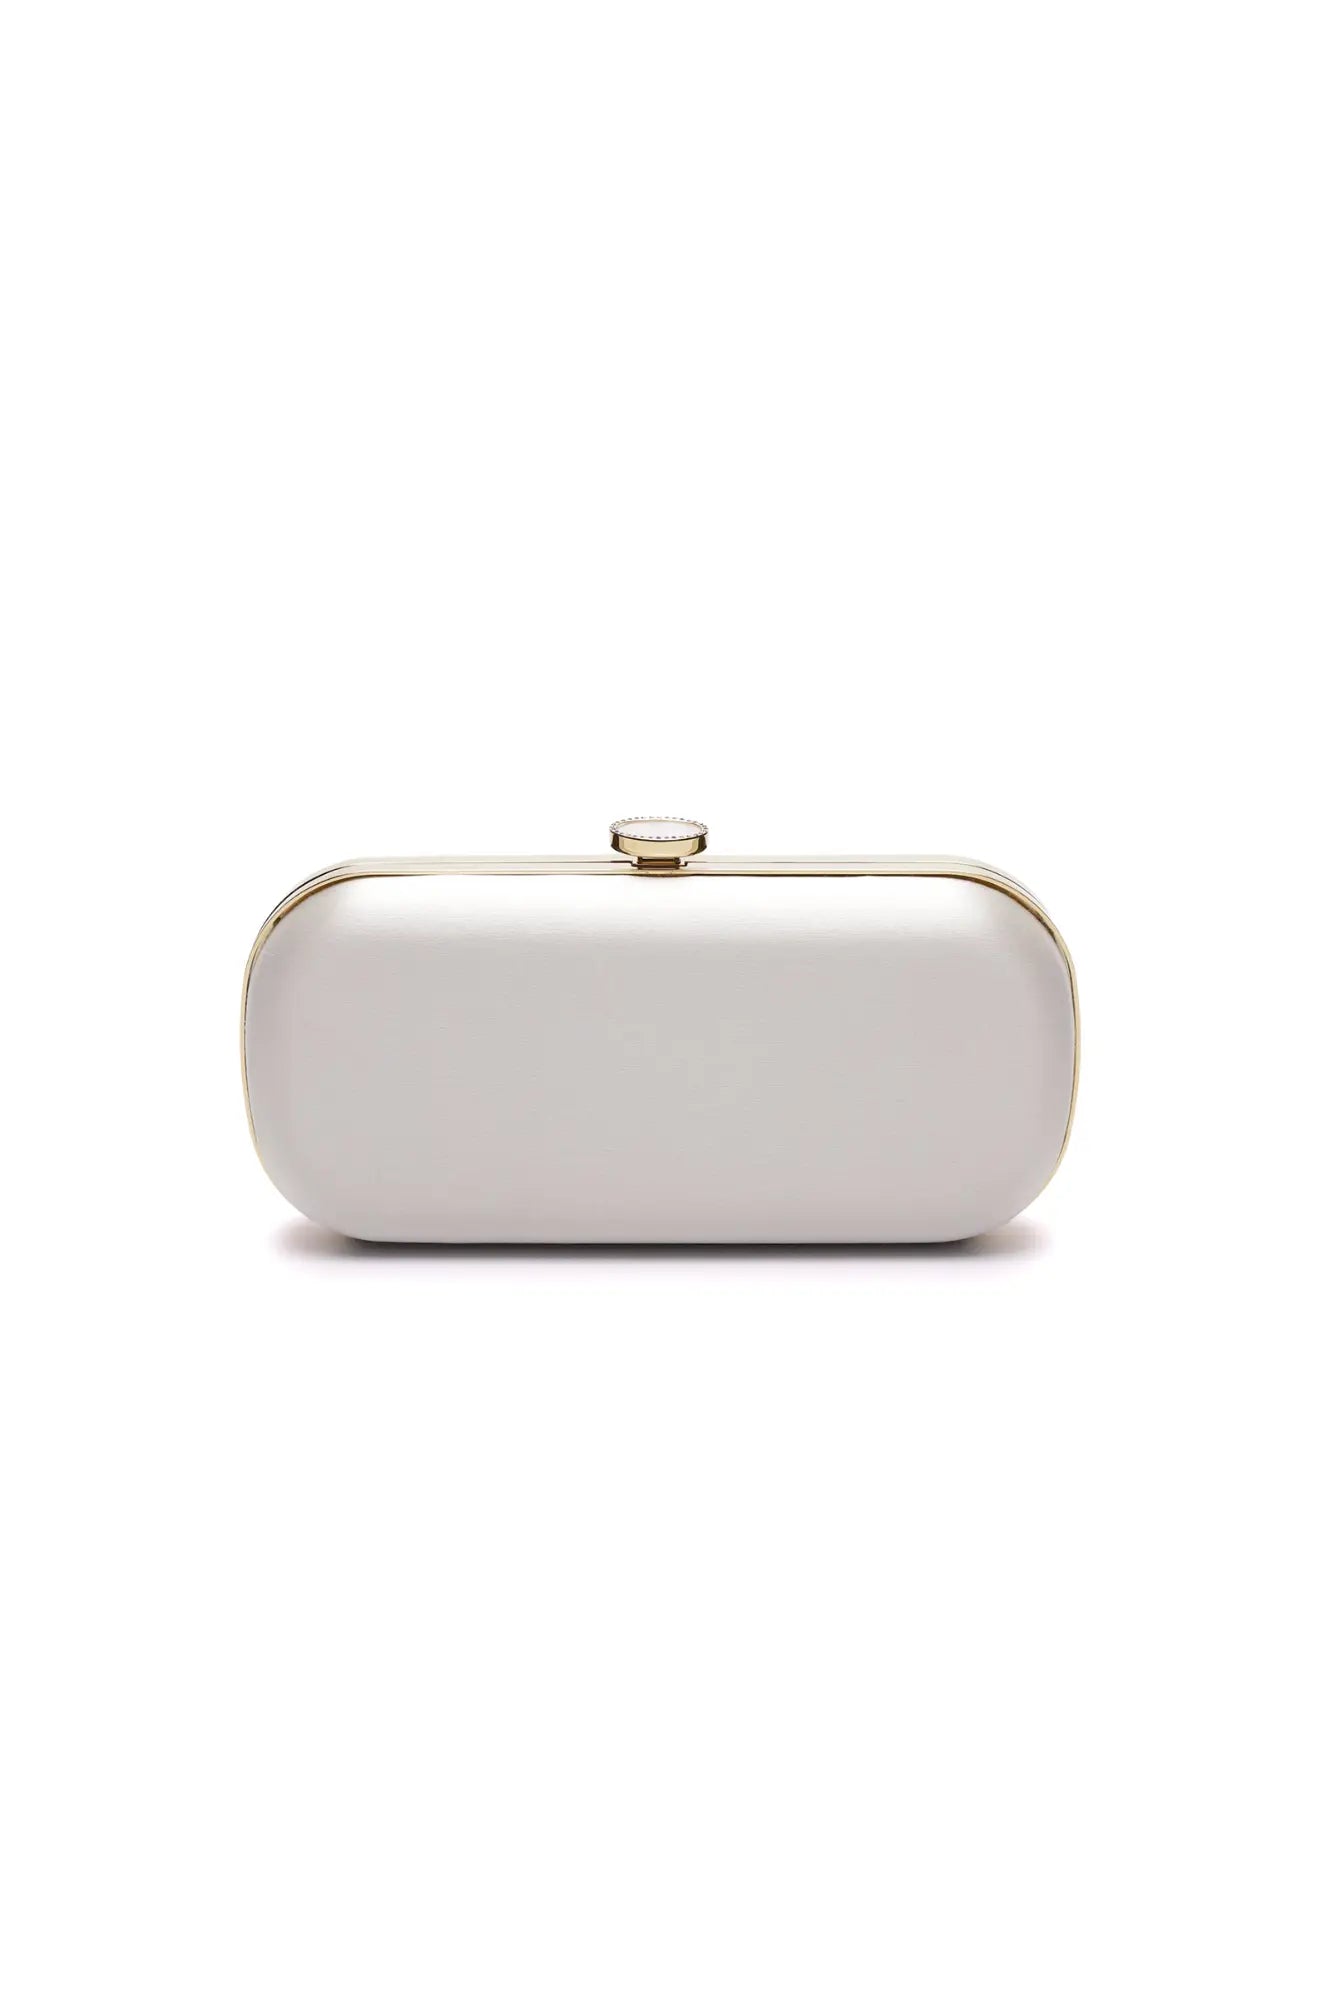 Bridal Bella Clutch Ivory Petite with a gold-tone clasp, isolated on a white background from The Bella Rosa Collection.